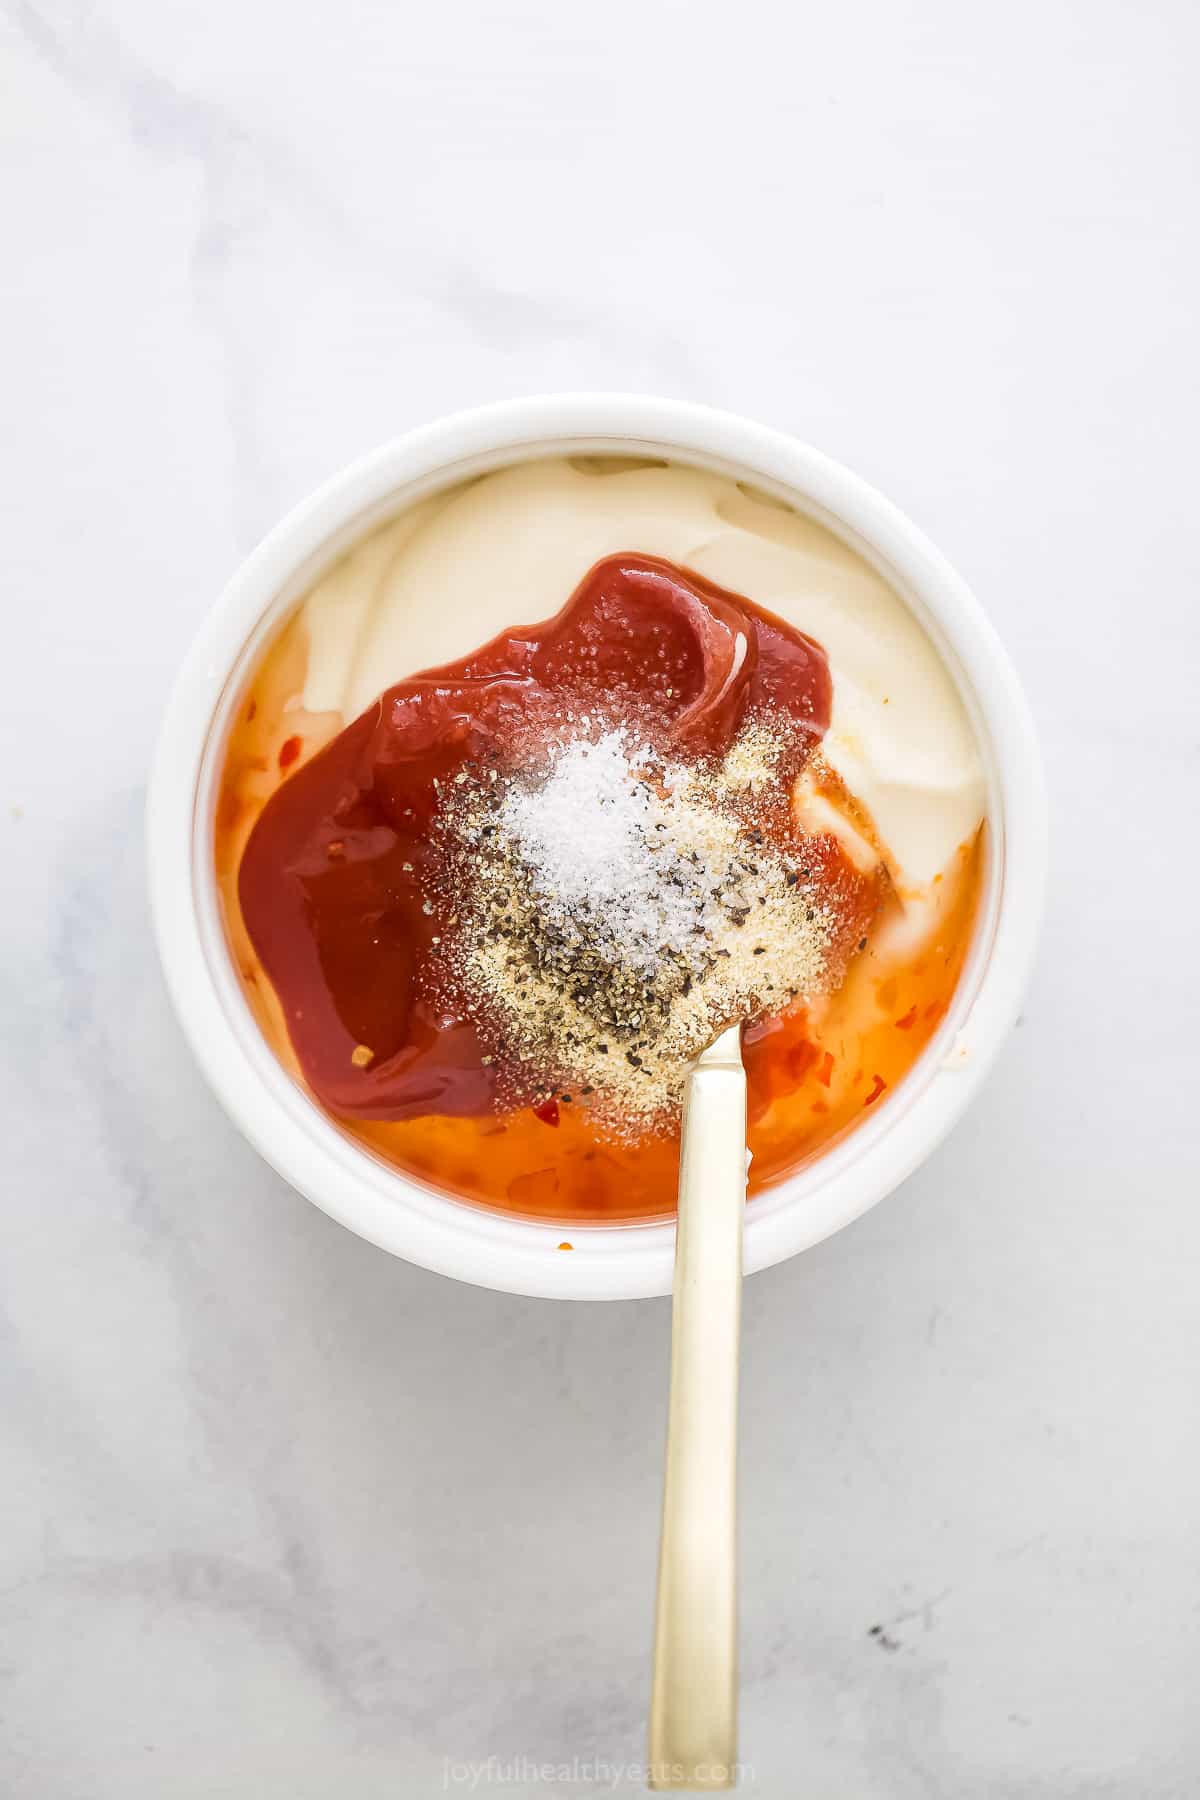 mixing mayonnaise, ketchup, and spices together to make a dipping sauce in a small bowl